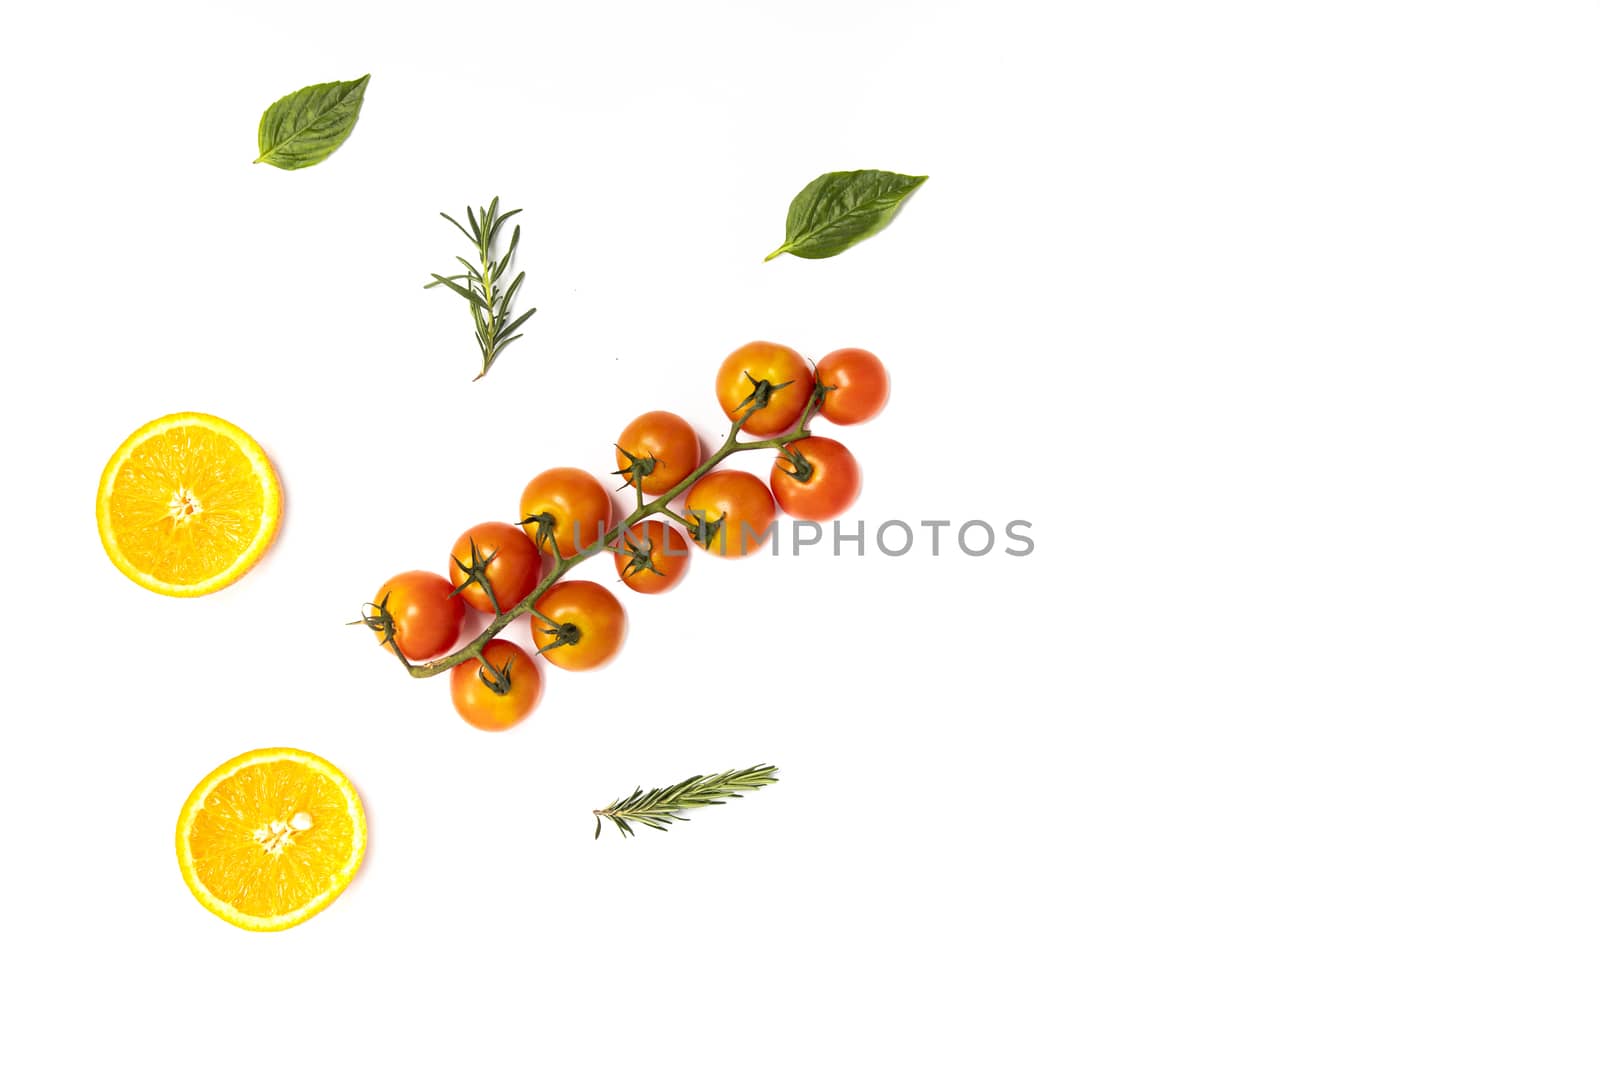 Colorful pattern of fresh summer orange slices and tomatoes with rosemary sprigs and basil leaves on white background. Top view.